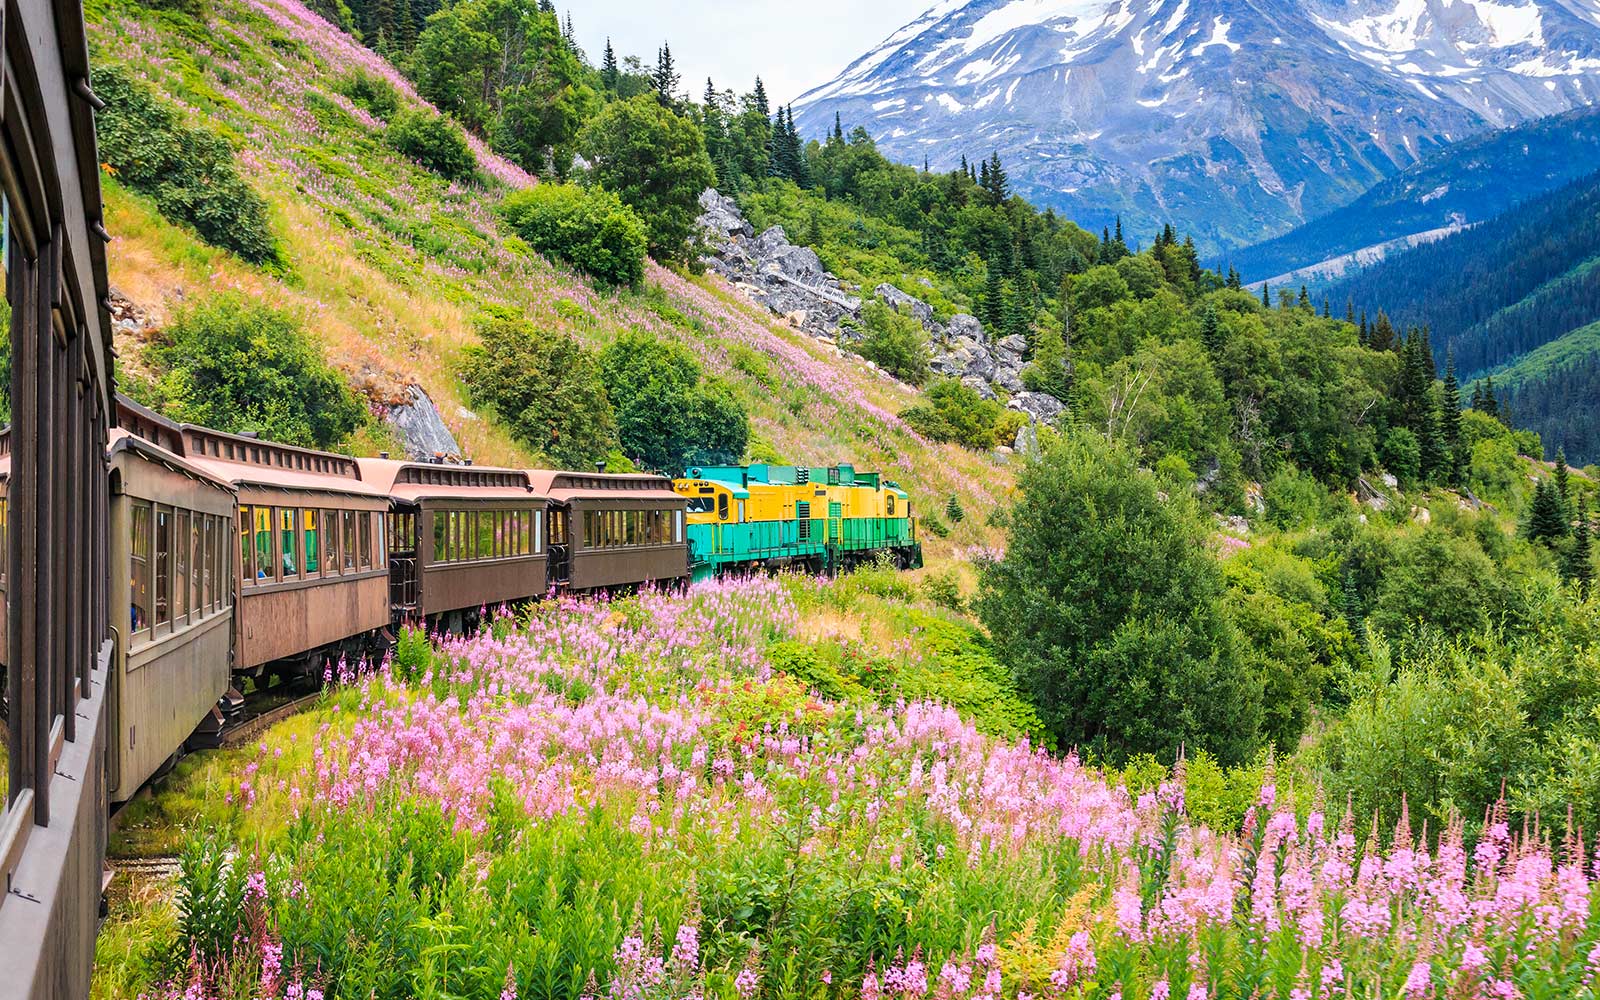 Travel & Leisure: The Best Train Trips to Take Across America